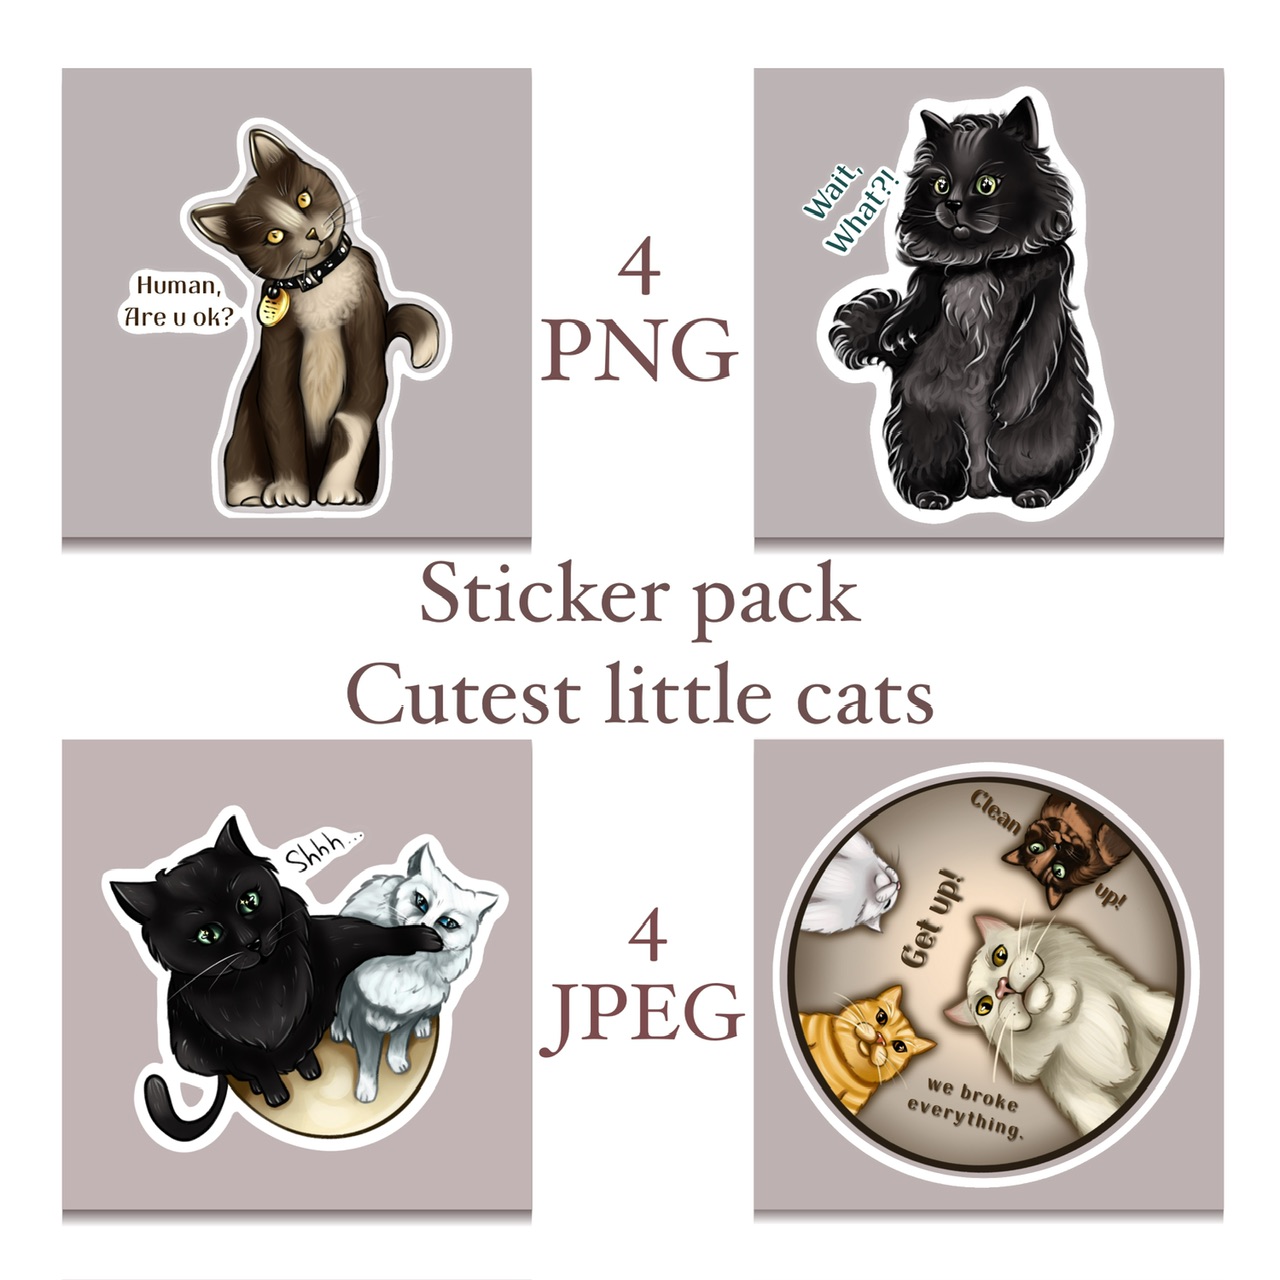 Sticker Pack Cutest Little Cats cover image.